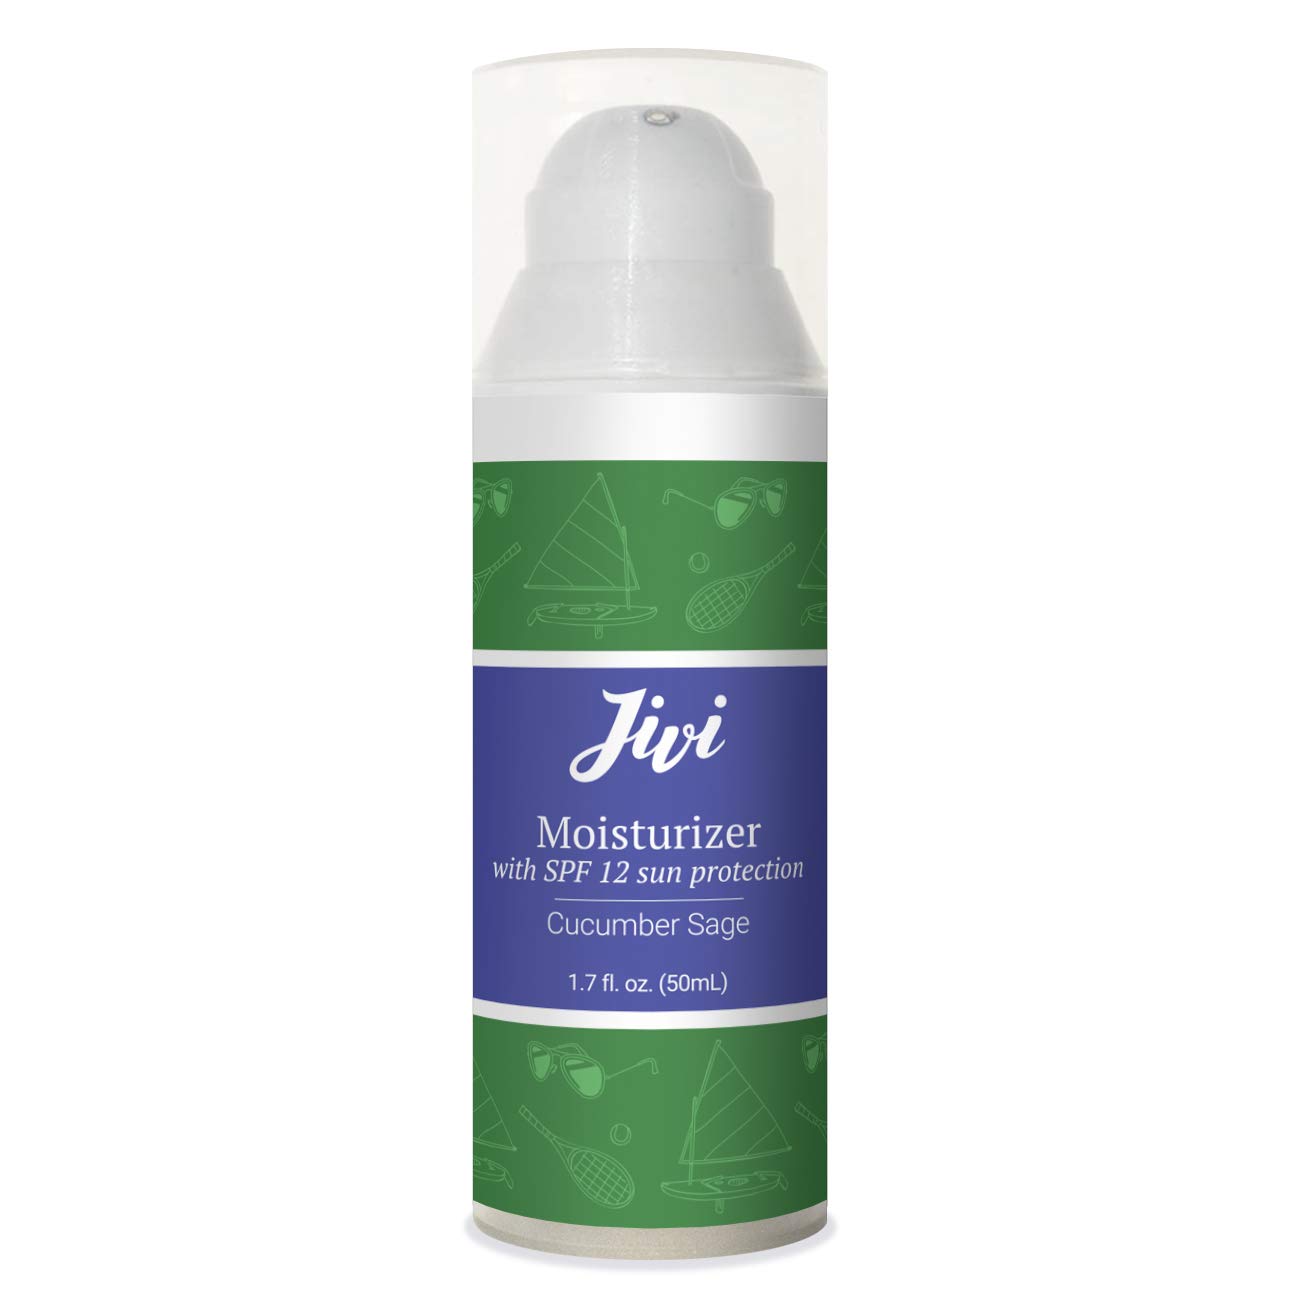 Face Moisturizer with SPF 12 Sun Protection (Cucumber Sage) | Reduces Redness and Prevents Sun Damage | 100% Natural with Organic Ingredients | Made for Sensitive and Oily Skin | 1.7 fl. oz.